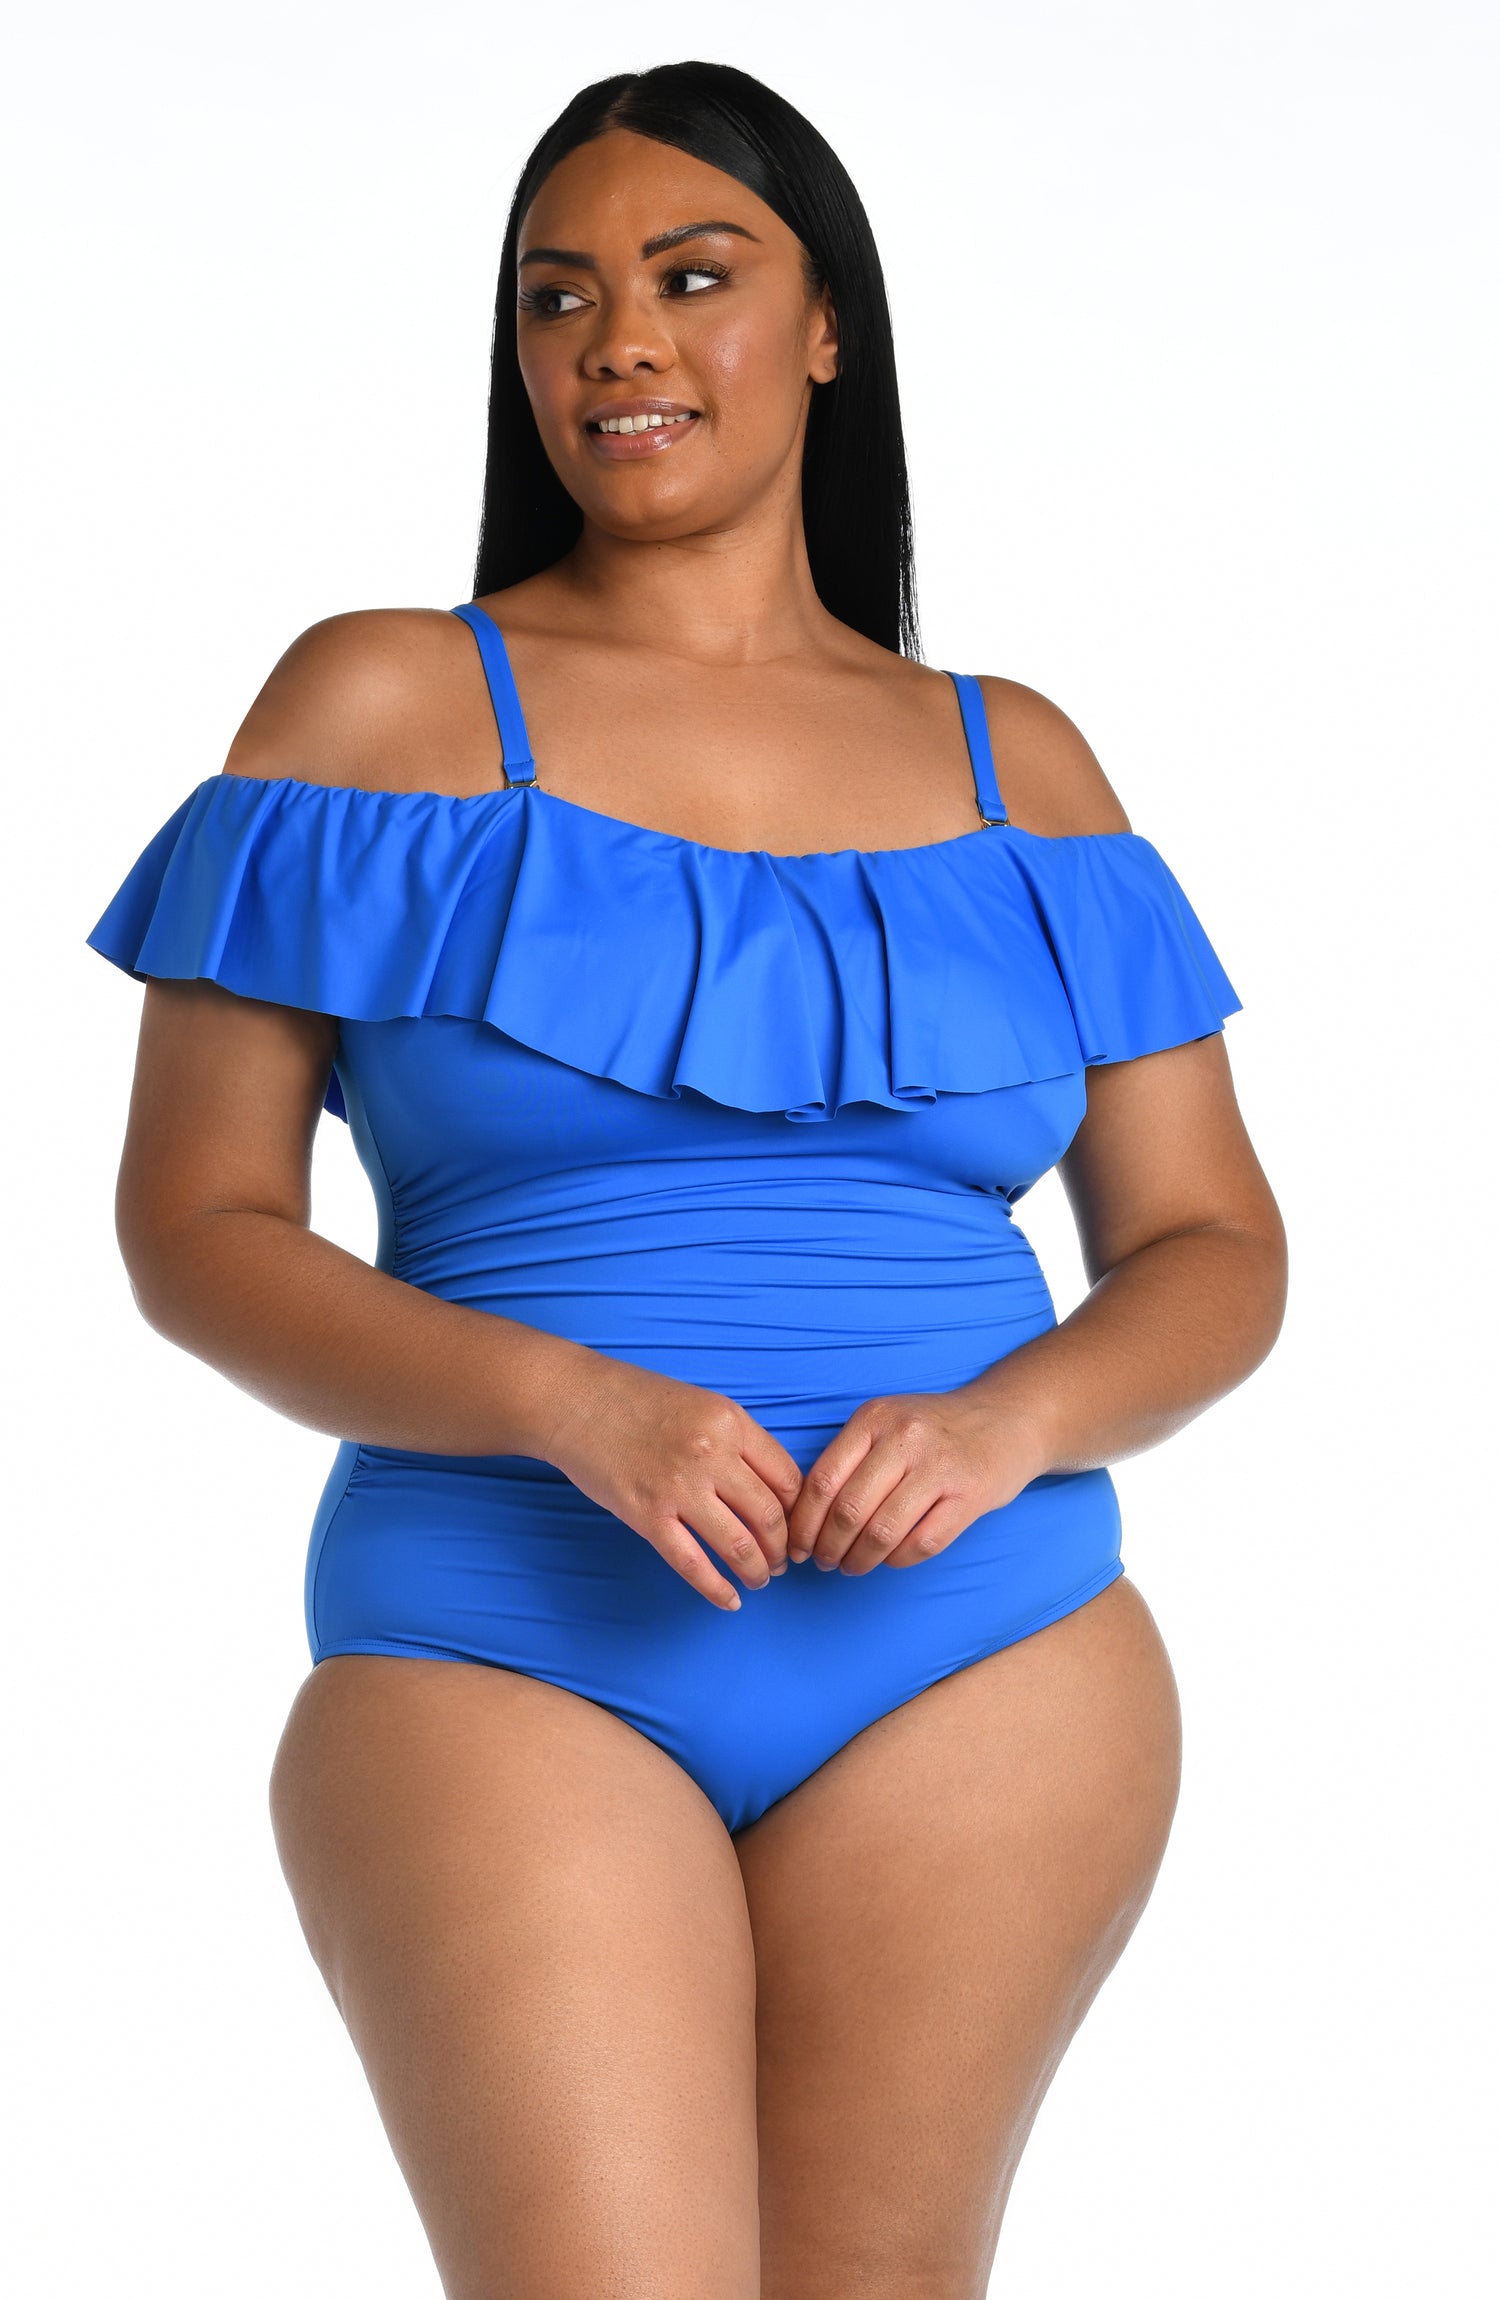 Model is wearing a capri blue colored one piece swimsuit from our Best-Selling Island Goddess collection.